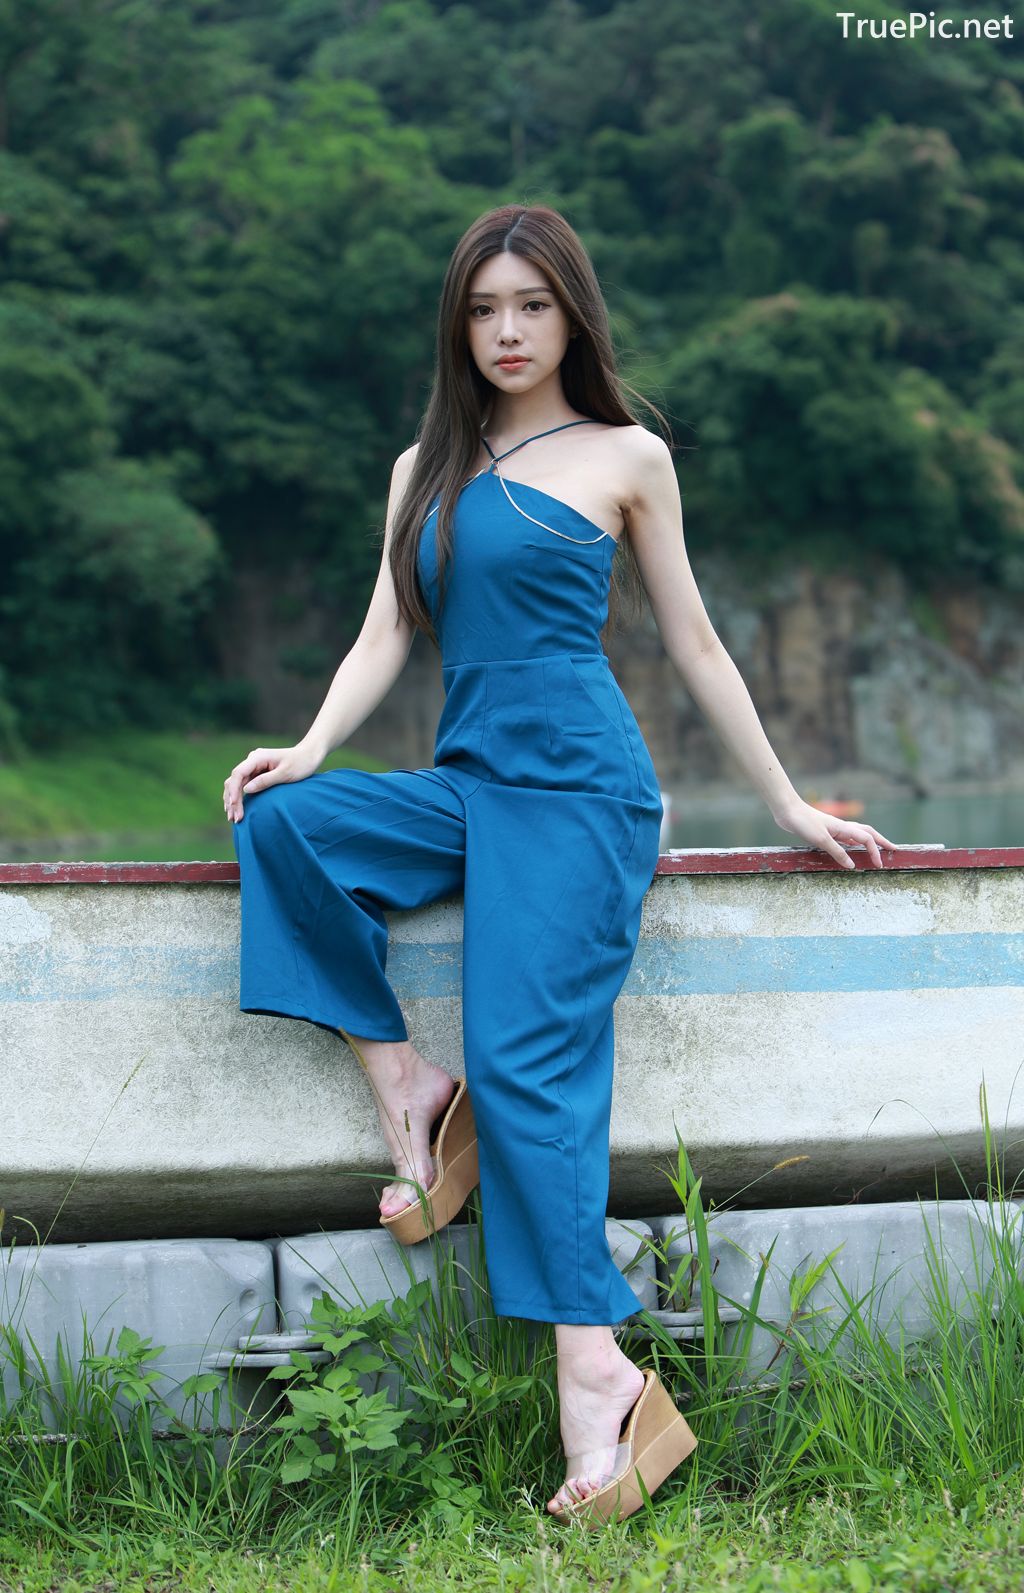 Image-Taiwanese-Pure-Girl-承容-Young-Beautiful-And-Lovely-TruePic.net- Picture-18